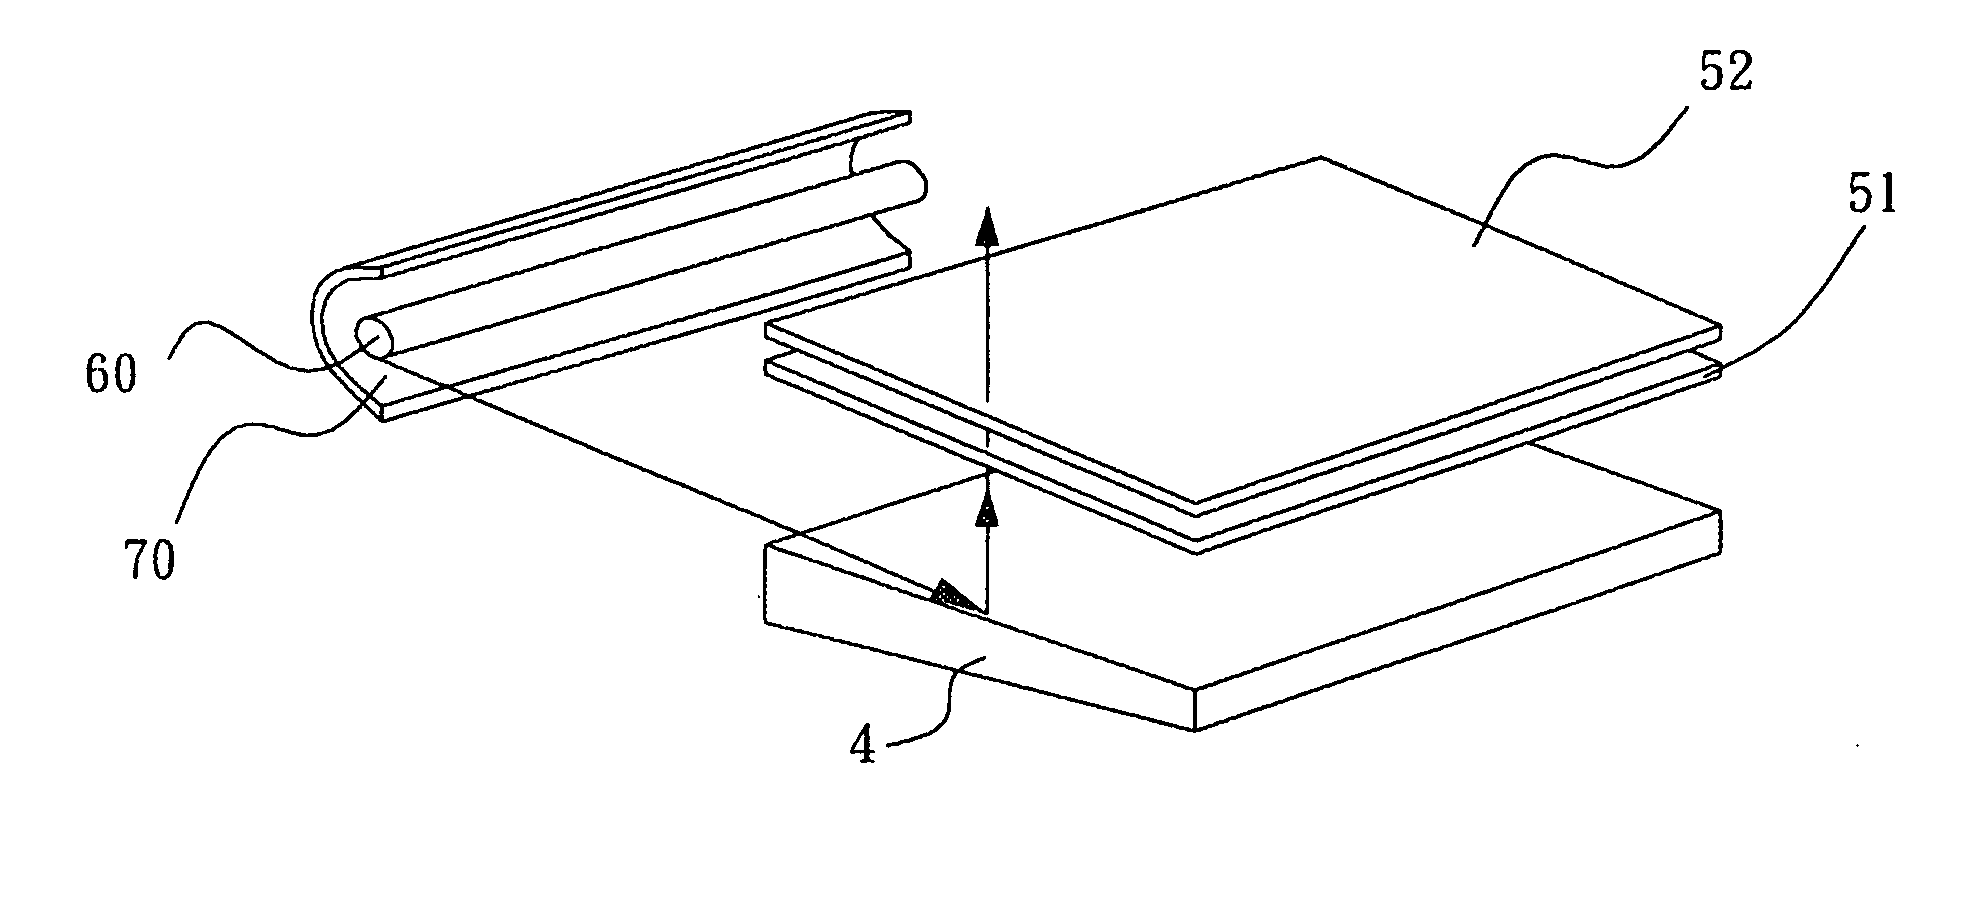 Reflecting apparatus for backlight module of flat panel display